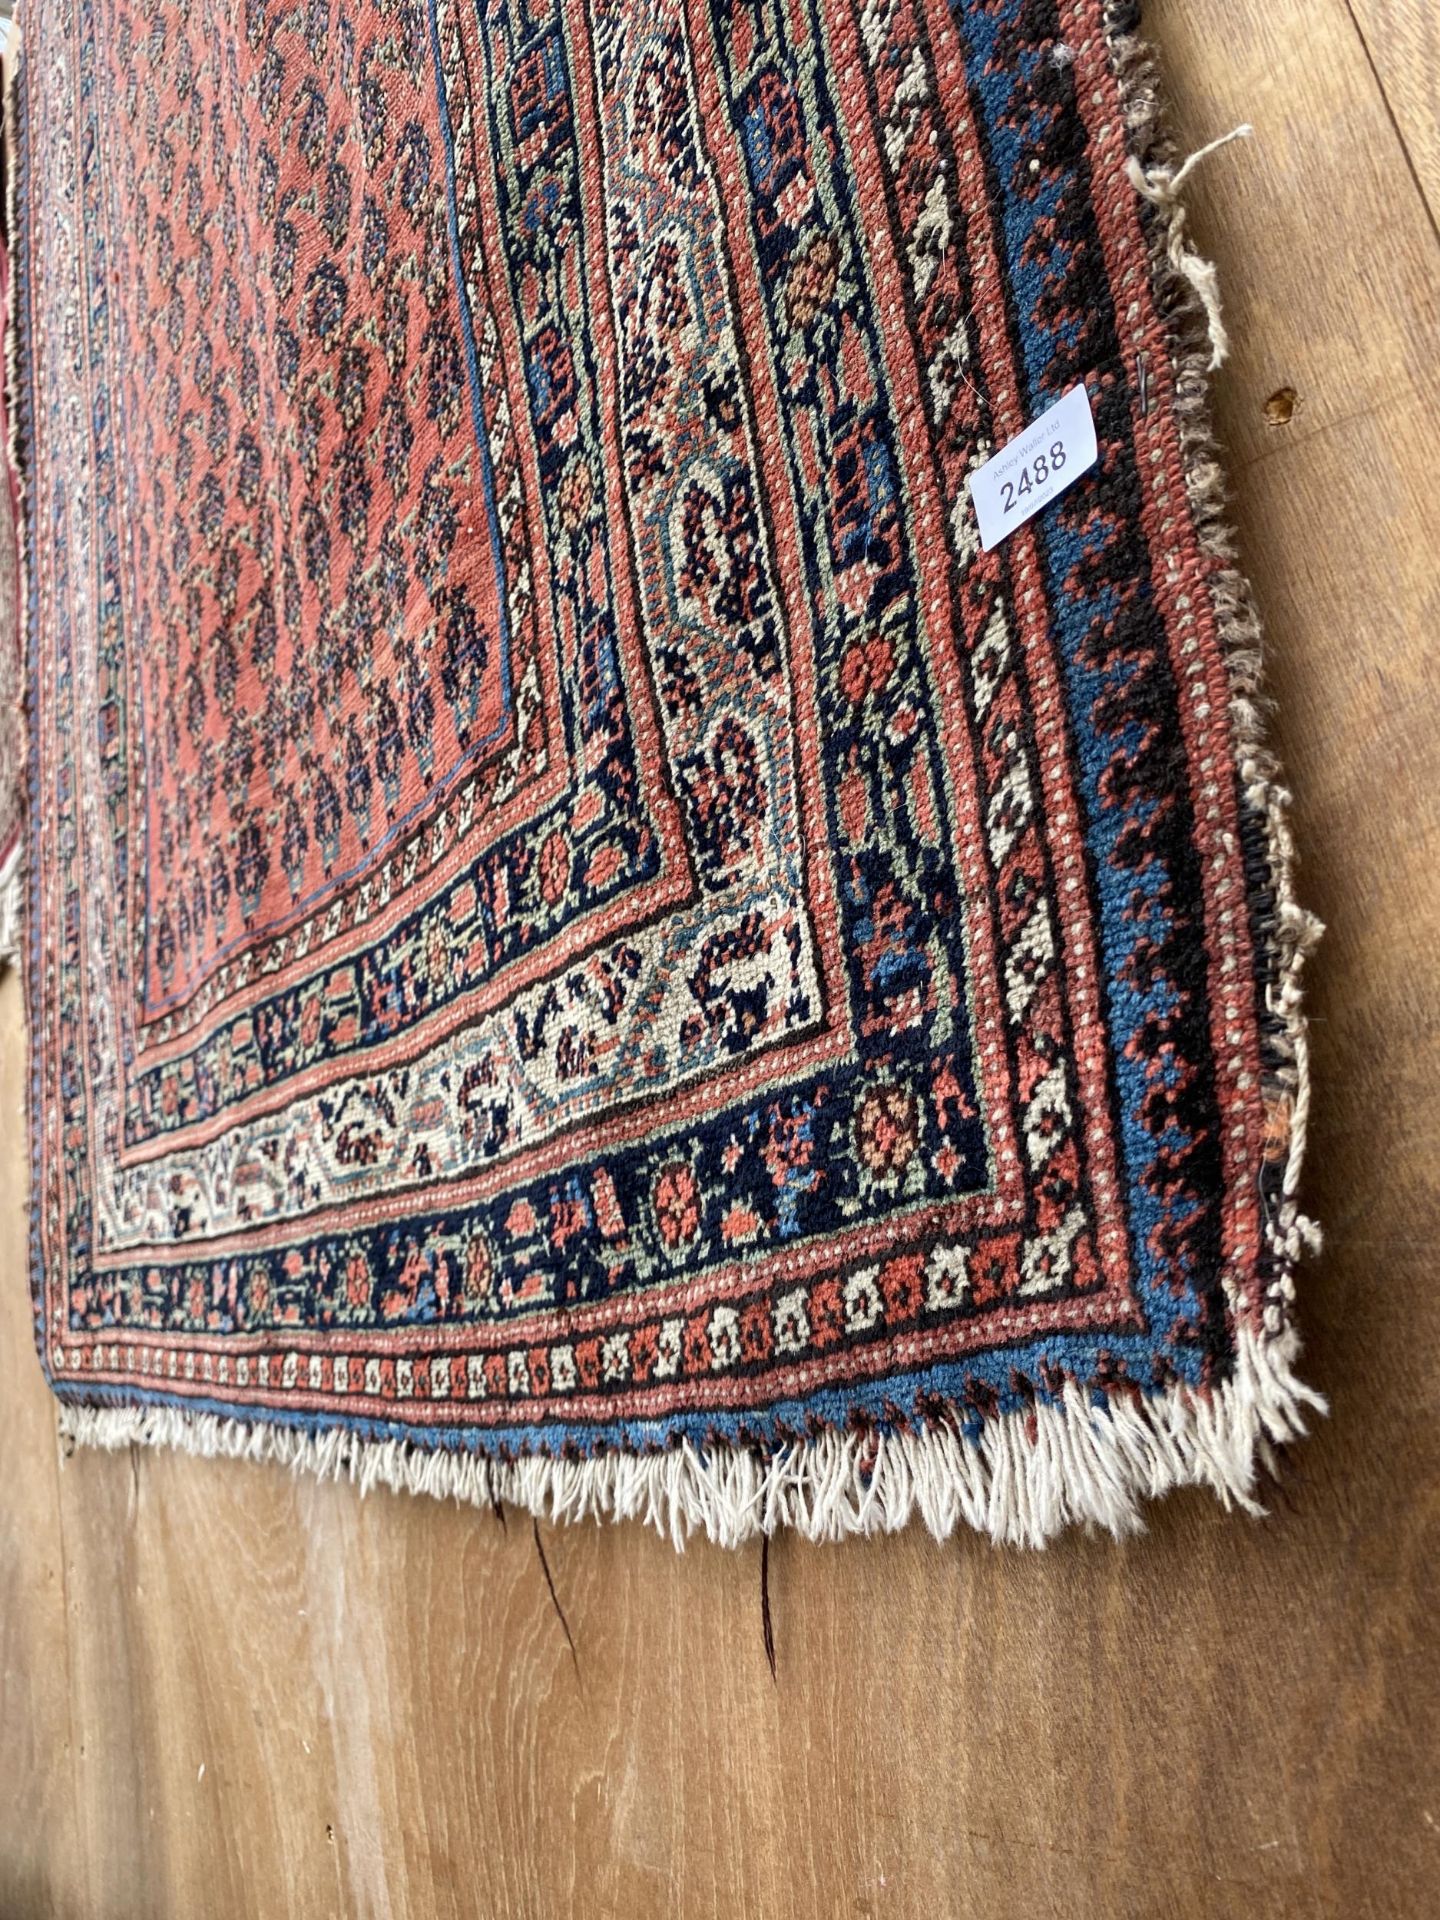 A LARGE RED AND BLUE PATTERNED RUG - Bild 2 aus 2